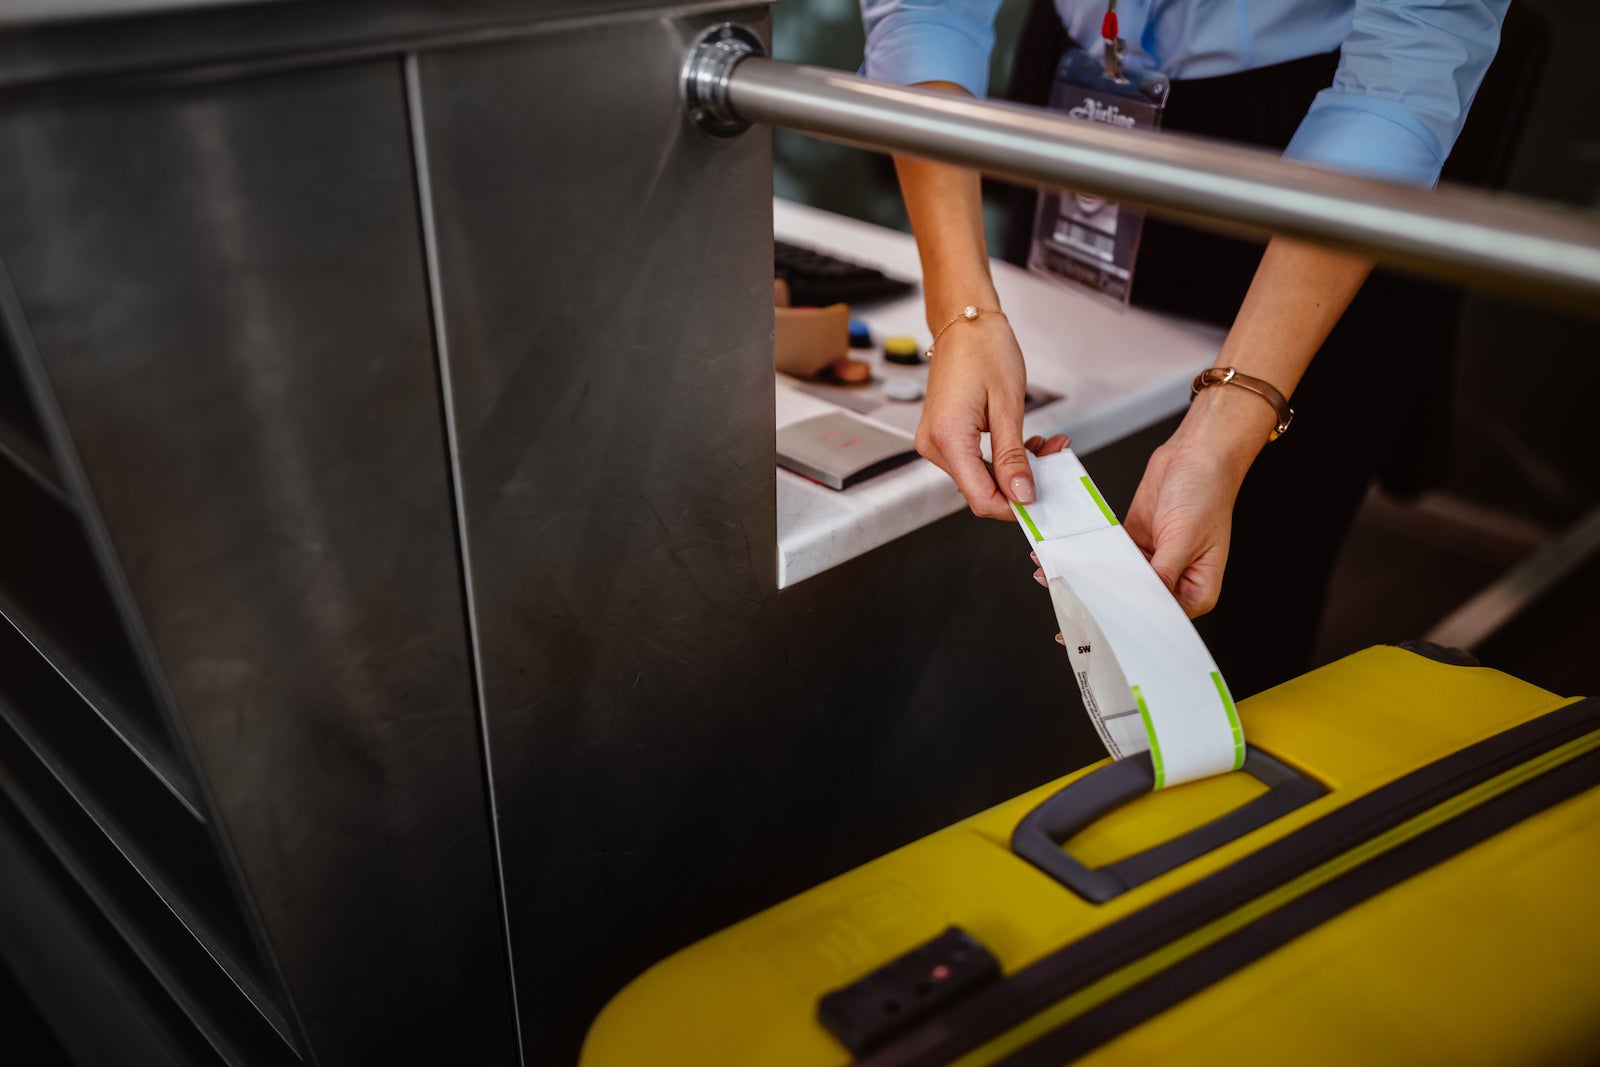 Airport check-in counter employee attaching tag on luggage